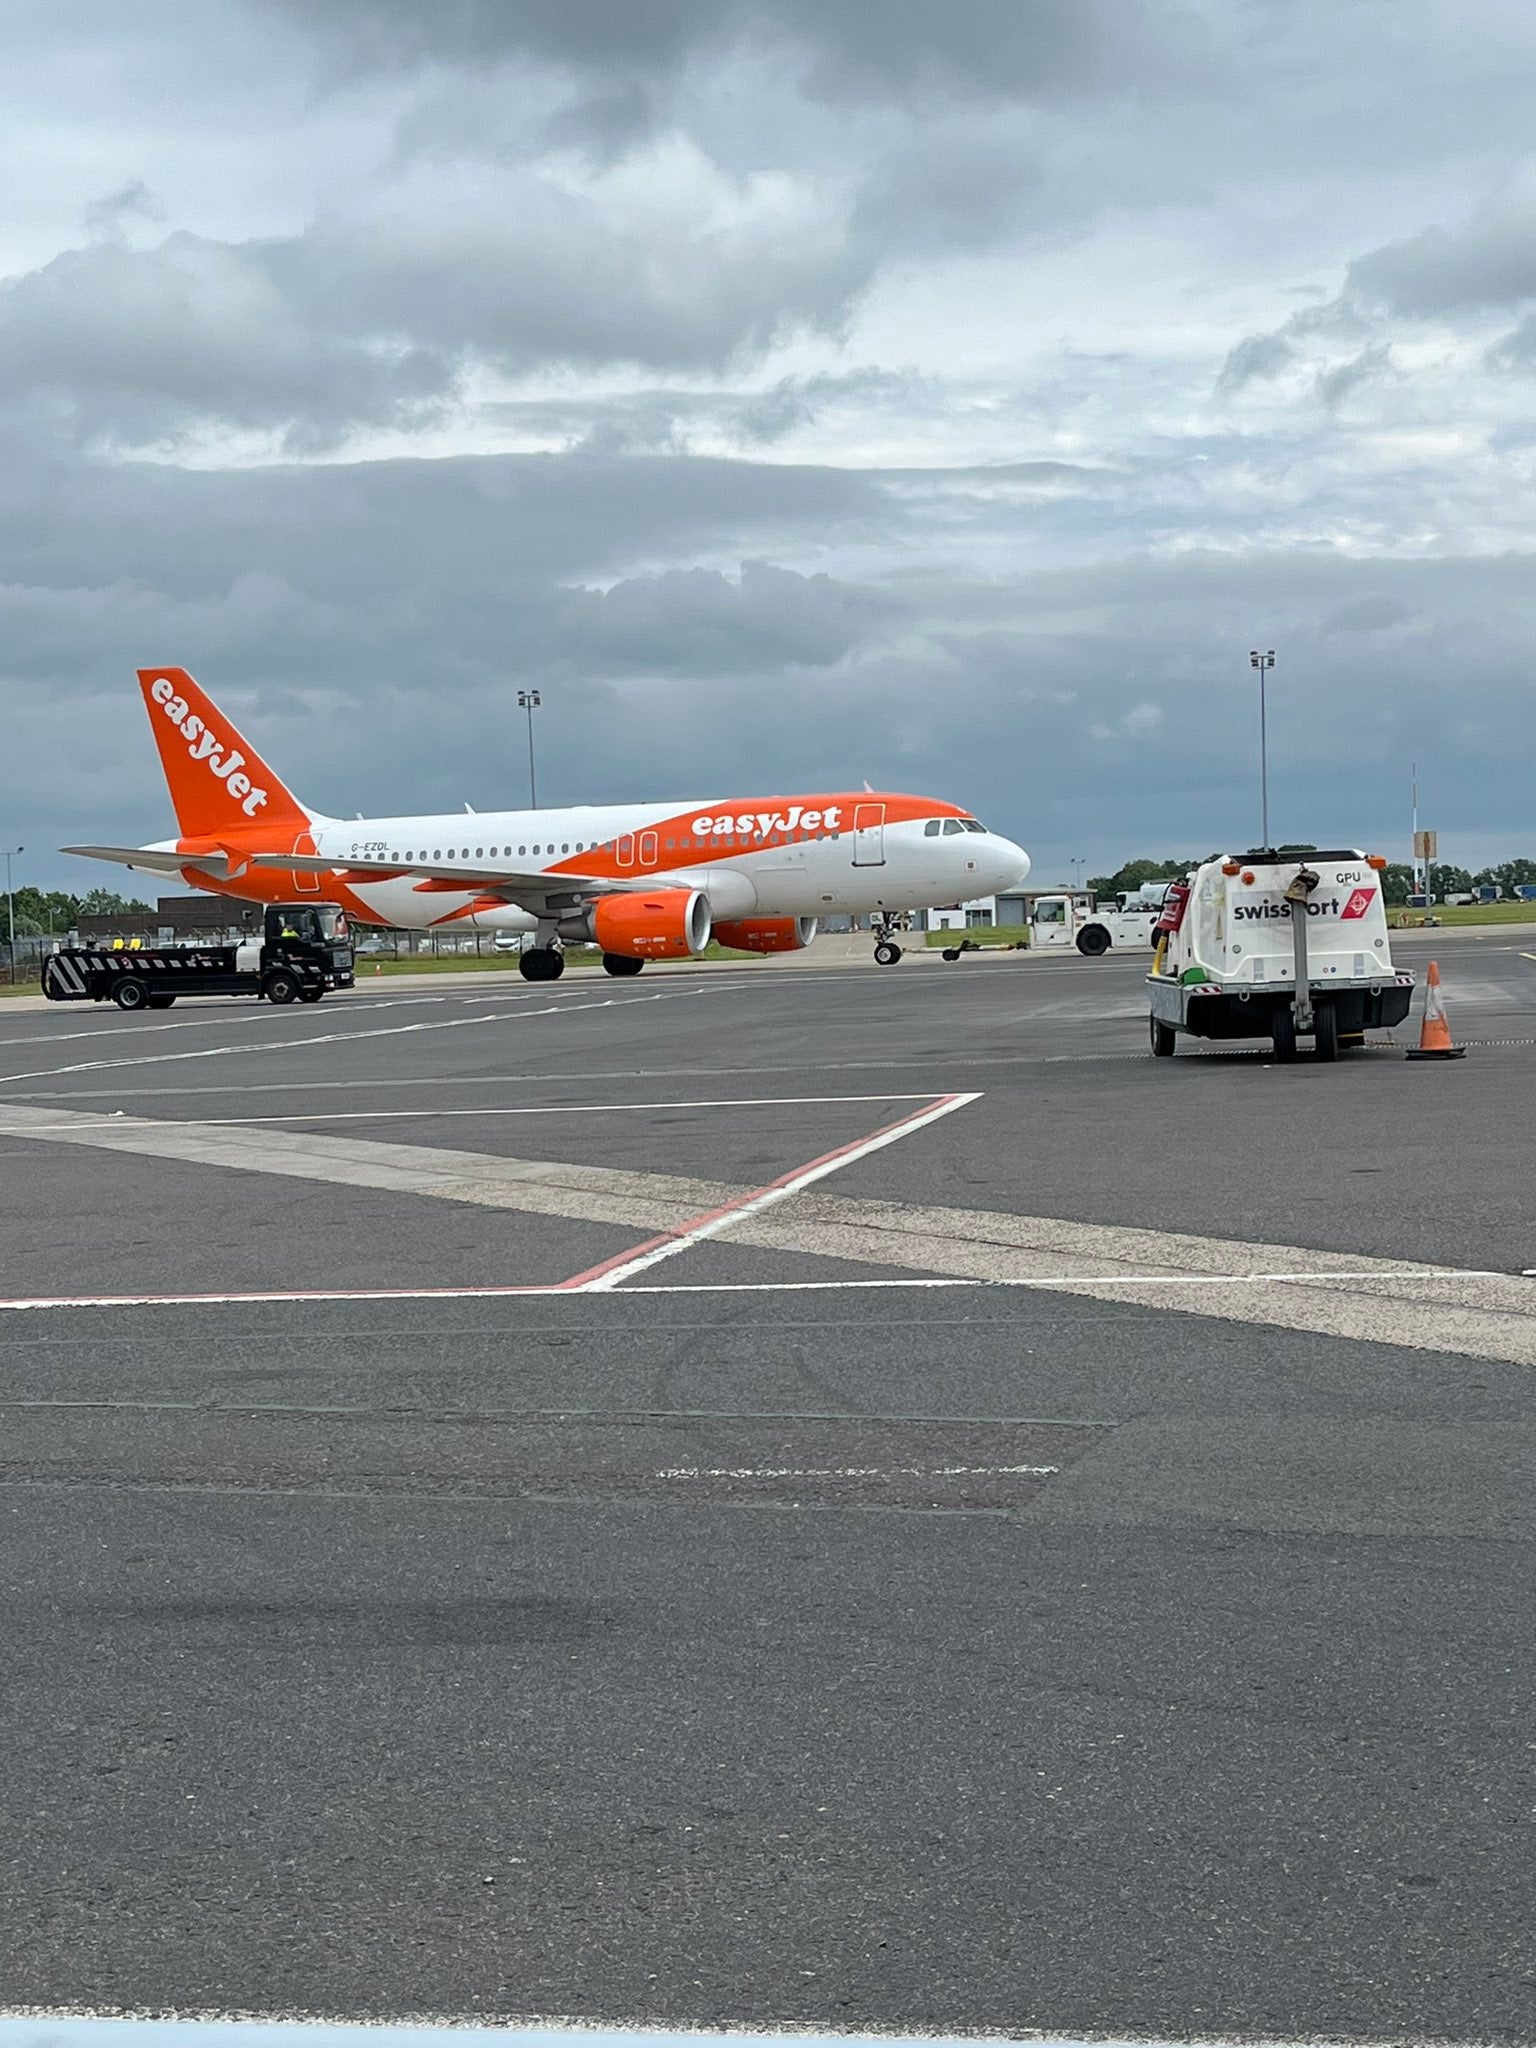 EasyJet has apologised for the incident and said it is investigating to find out what happened